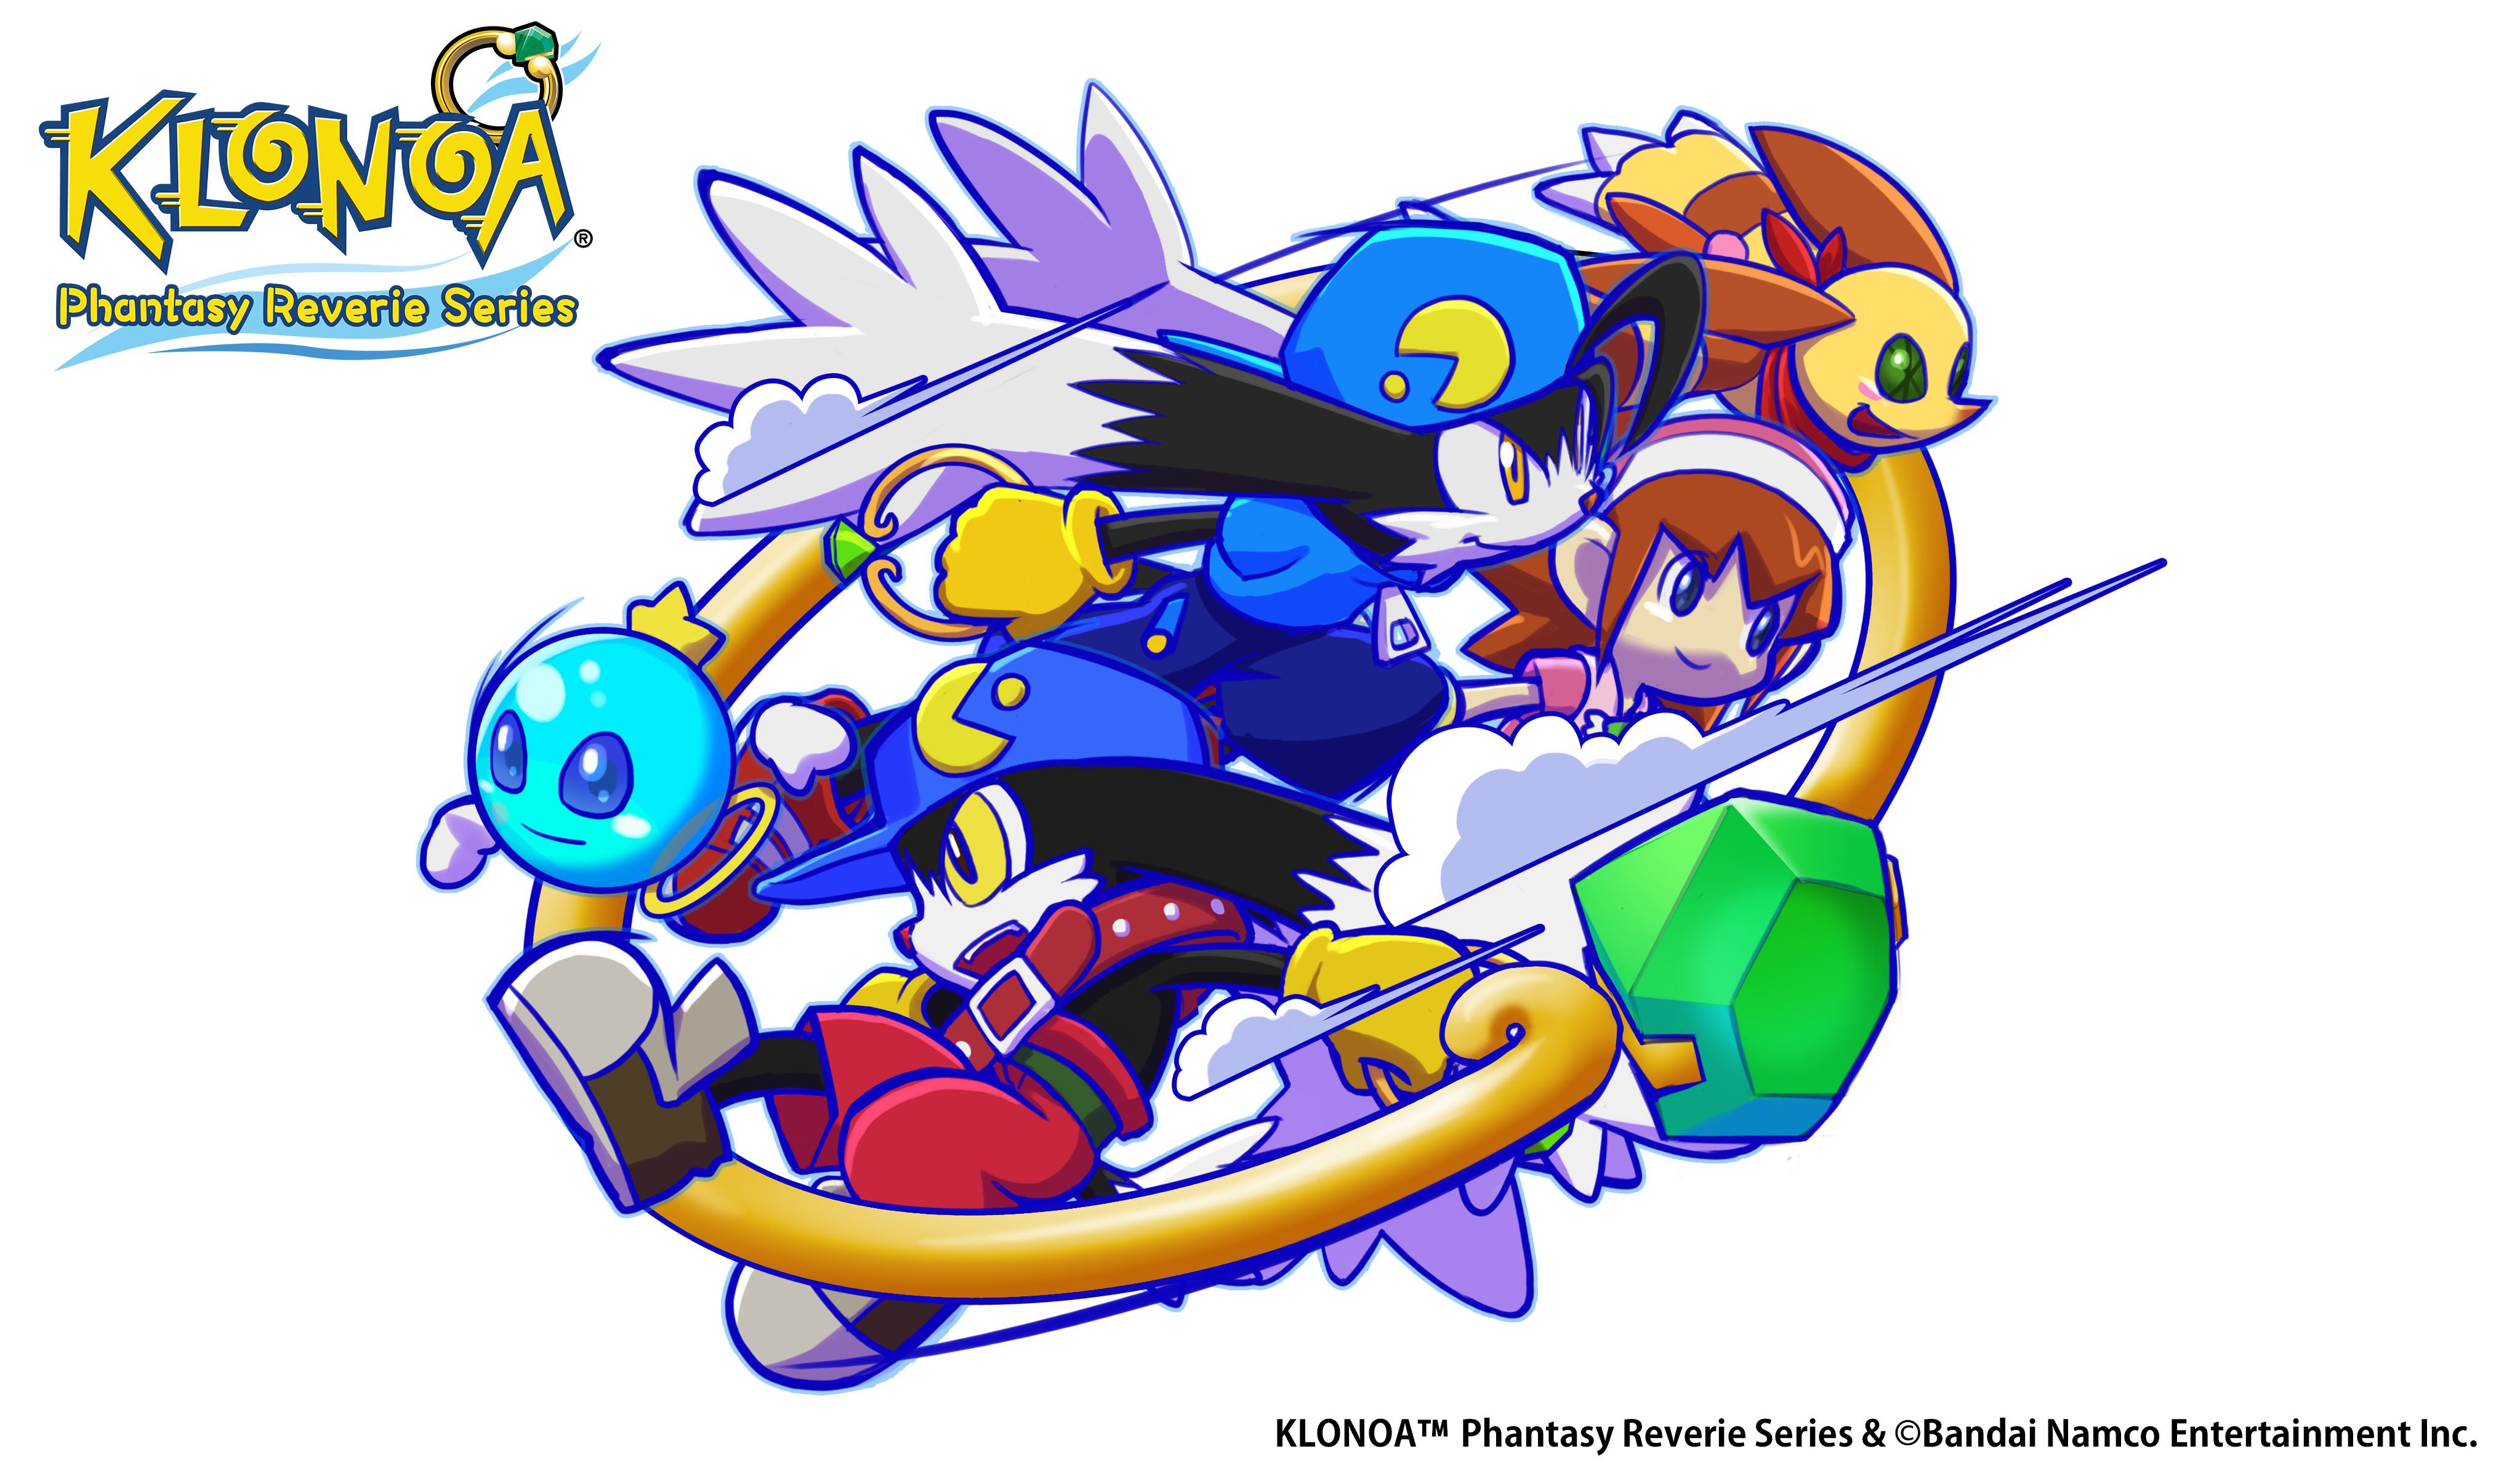 #
      KLONOA Phantasy Reverie Series for PS5, Xbox Series, PS4, Xbox One, and PC launches July 7 in Japan, July 8 worldwide